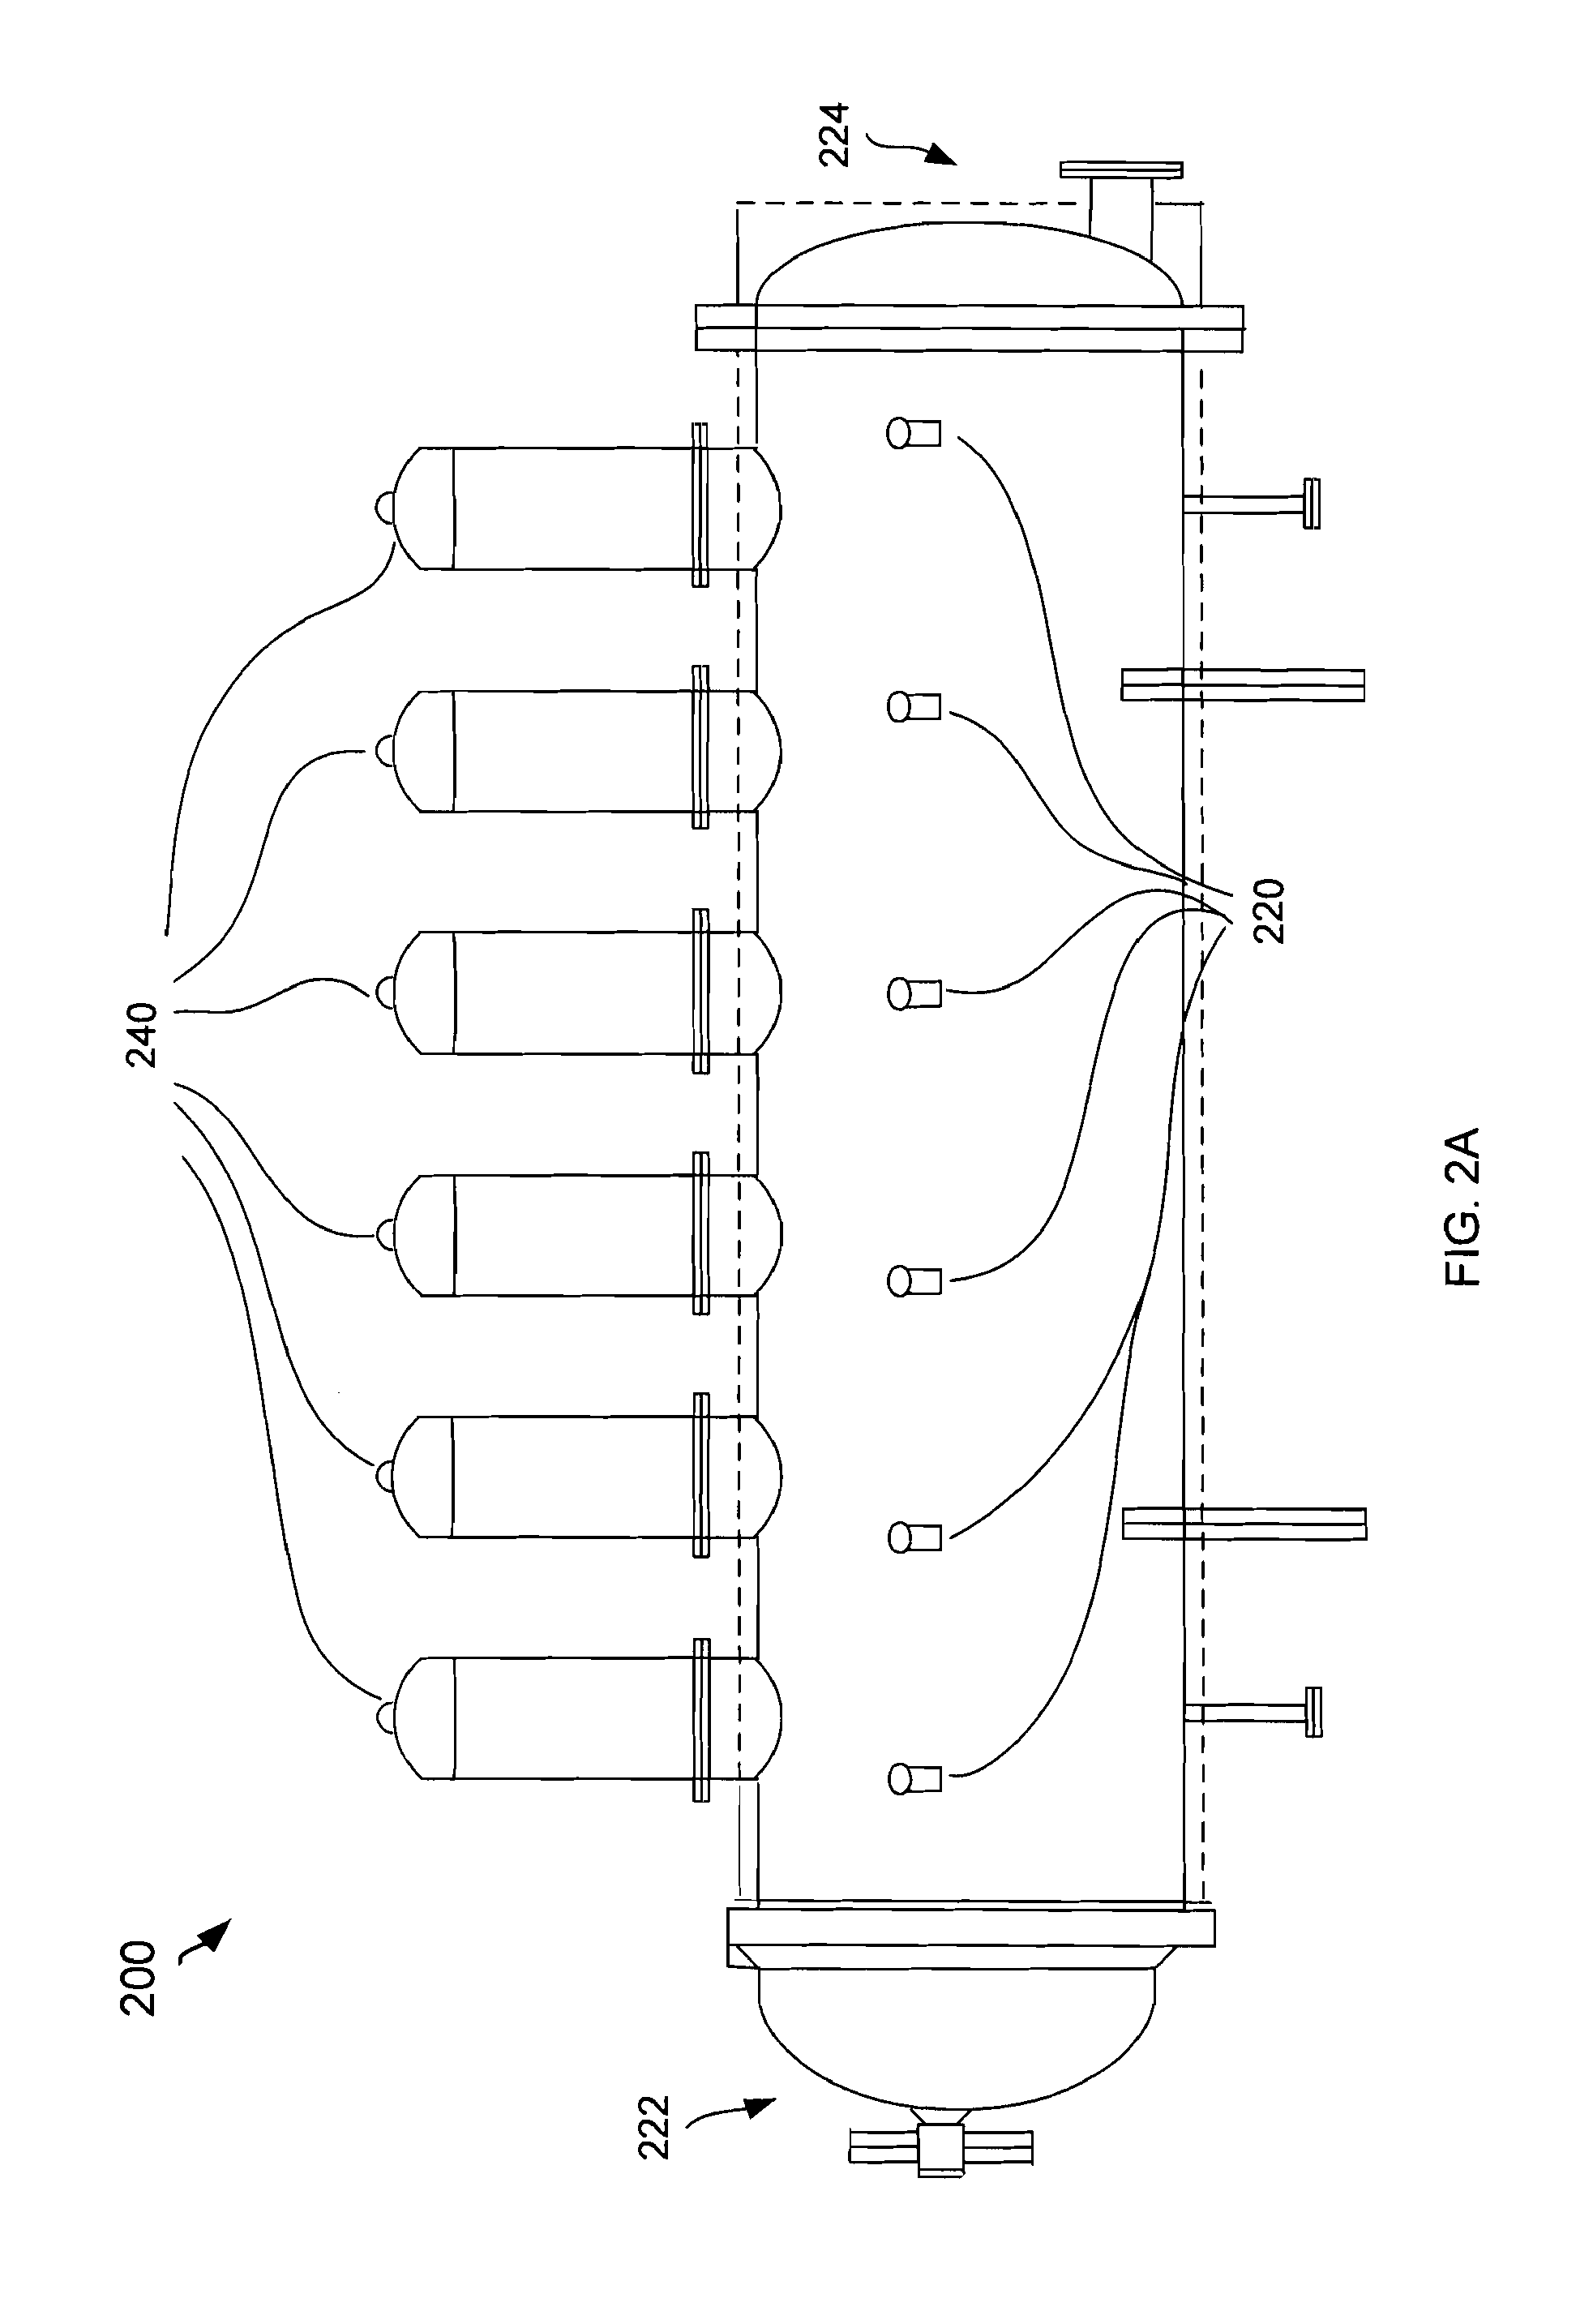 System and Method For The Preservative Treatment of Engineered Wood Products